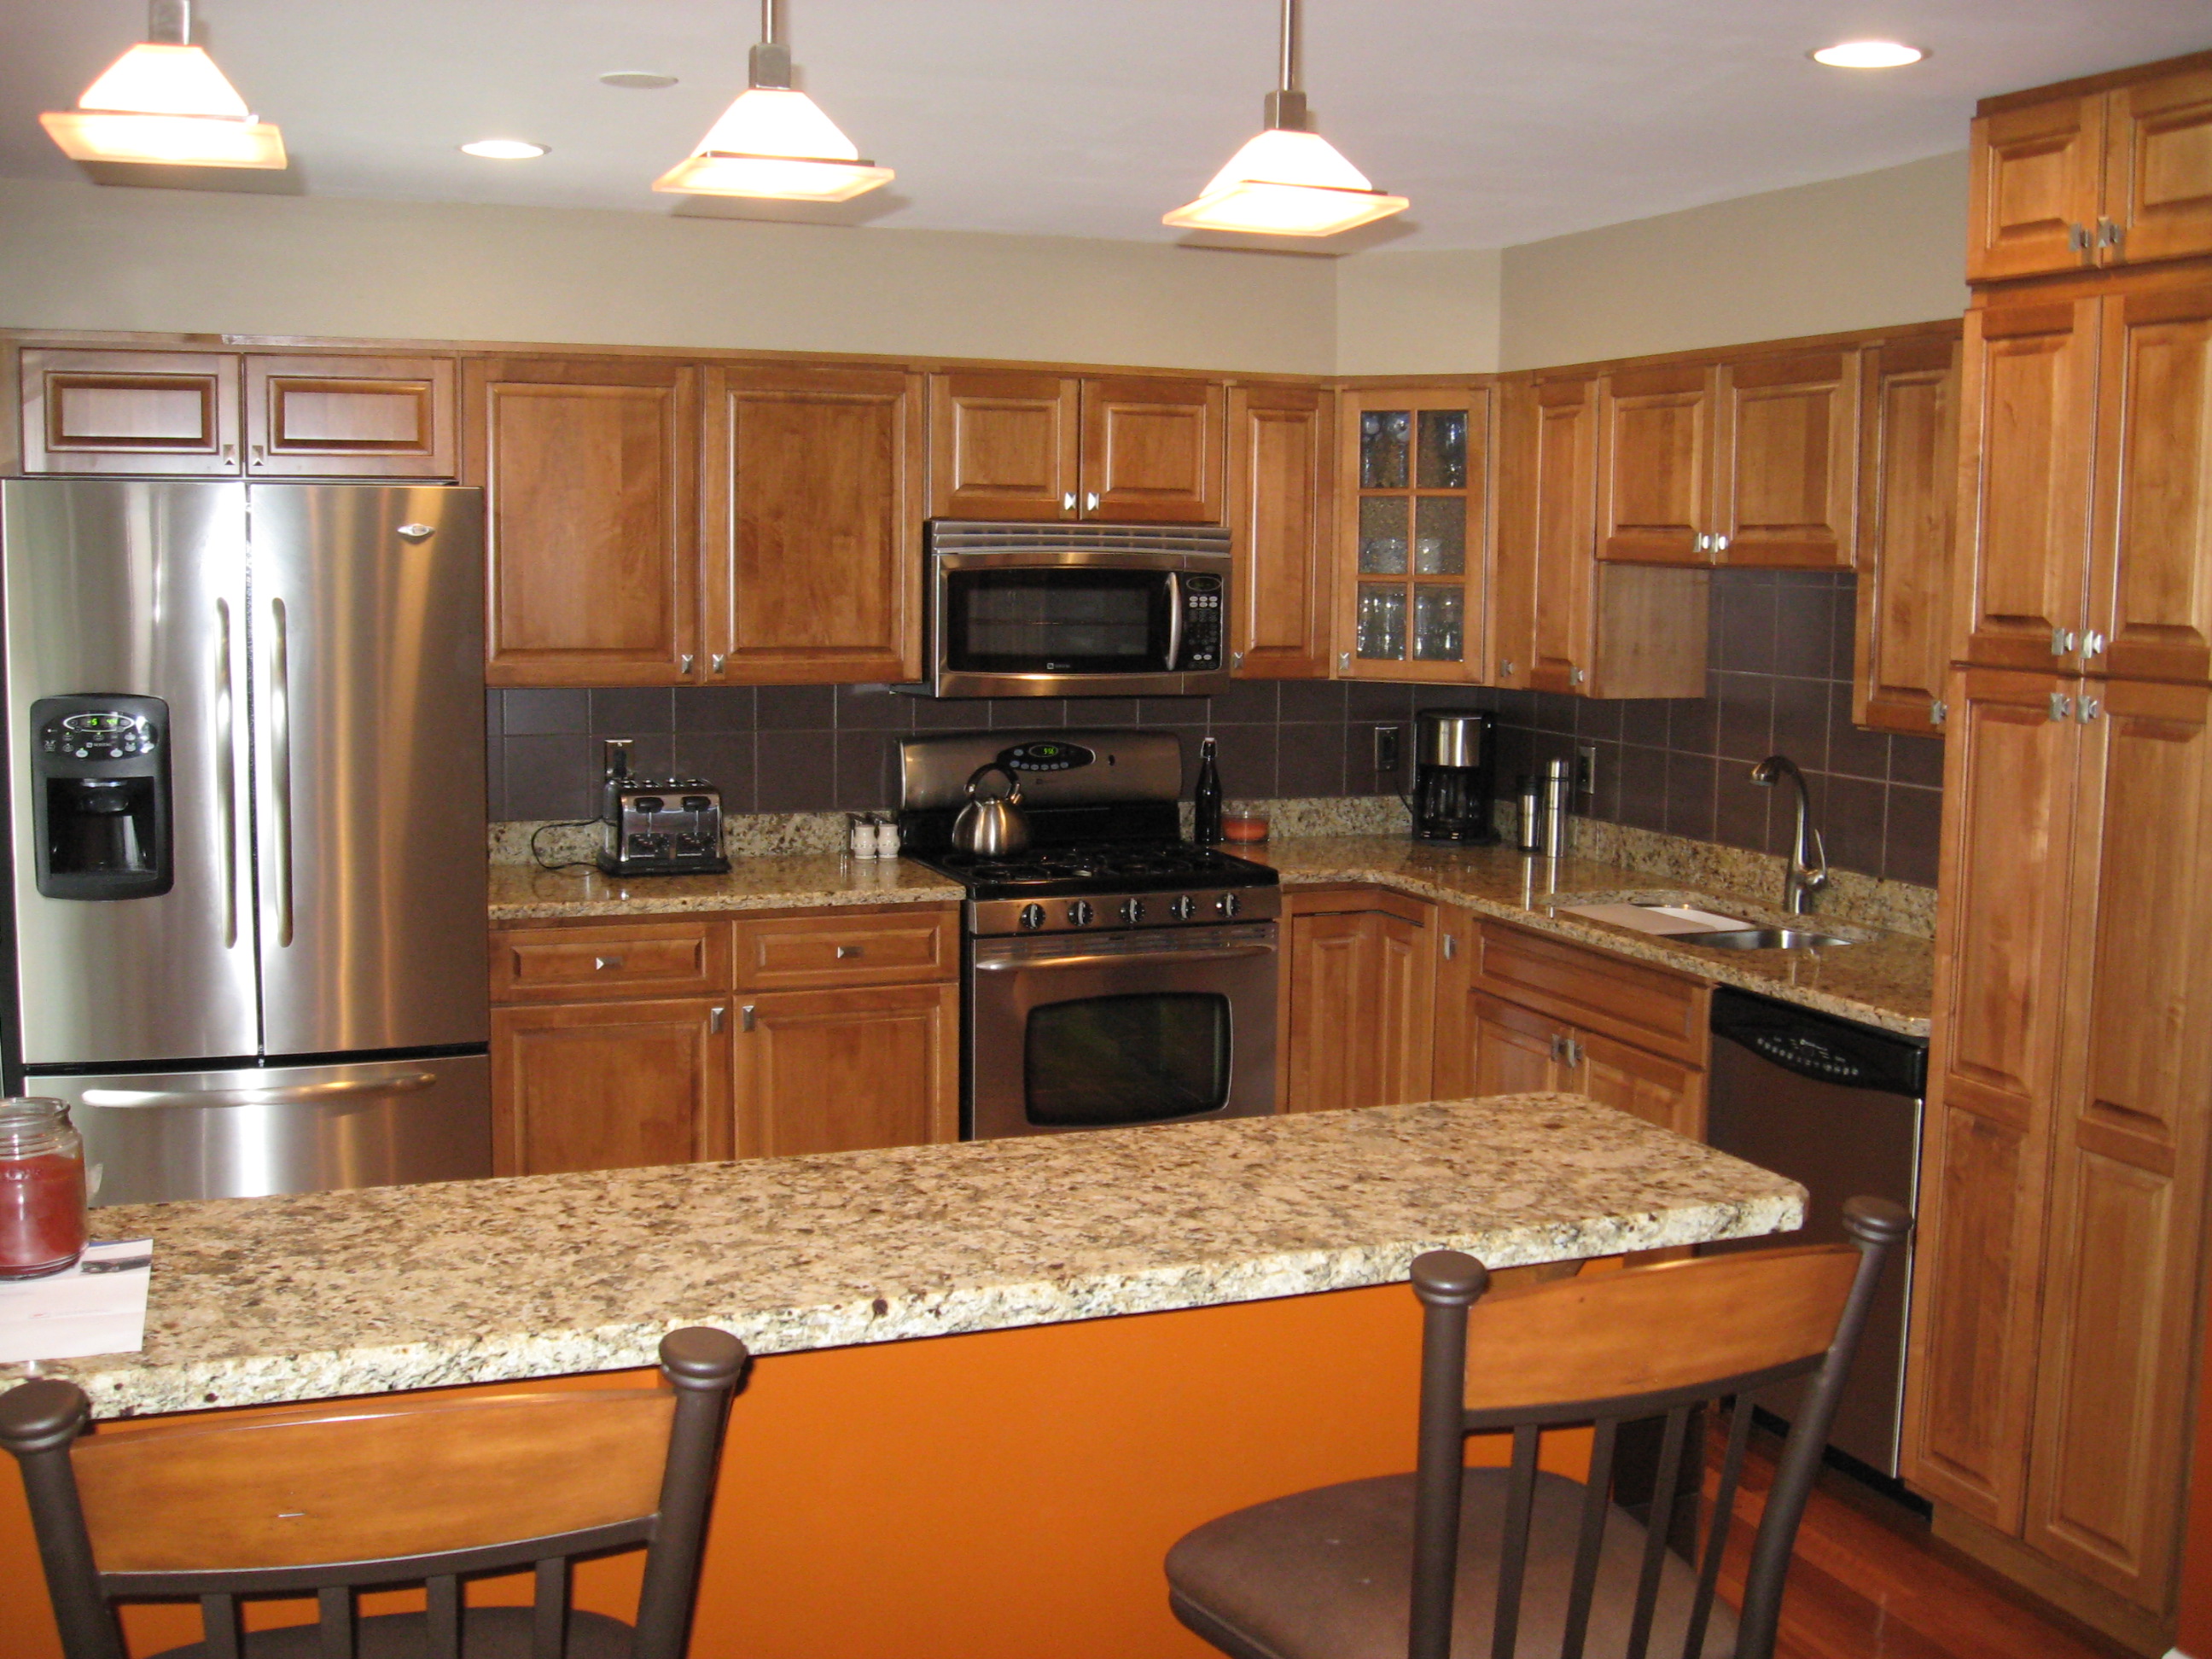 kitchen remodel remodeling cabinet renovation countertop designs idea kitchens gulfport cabinets decor tips hotter transform update cheap base functional economical